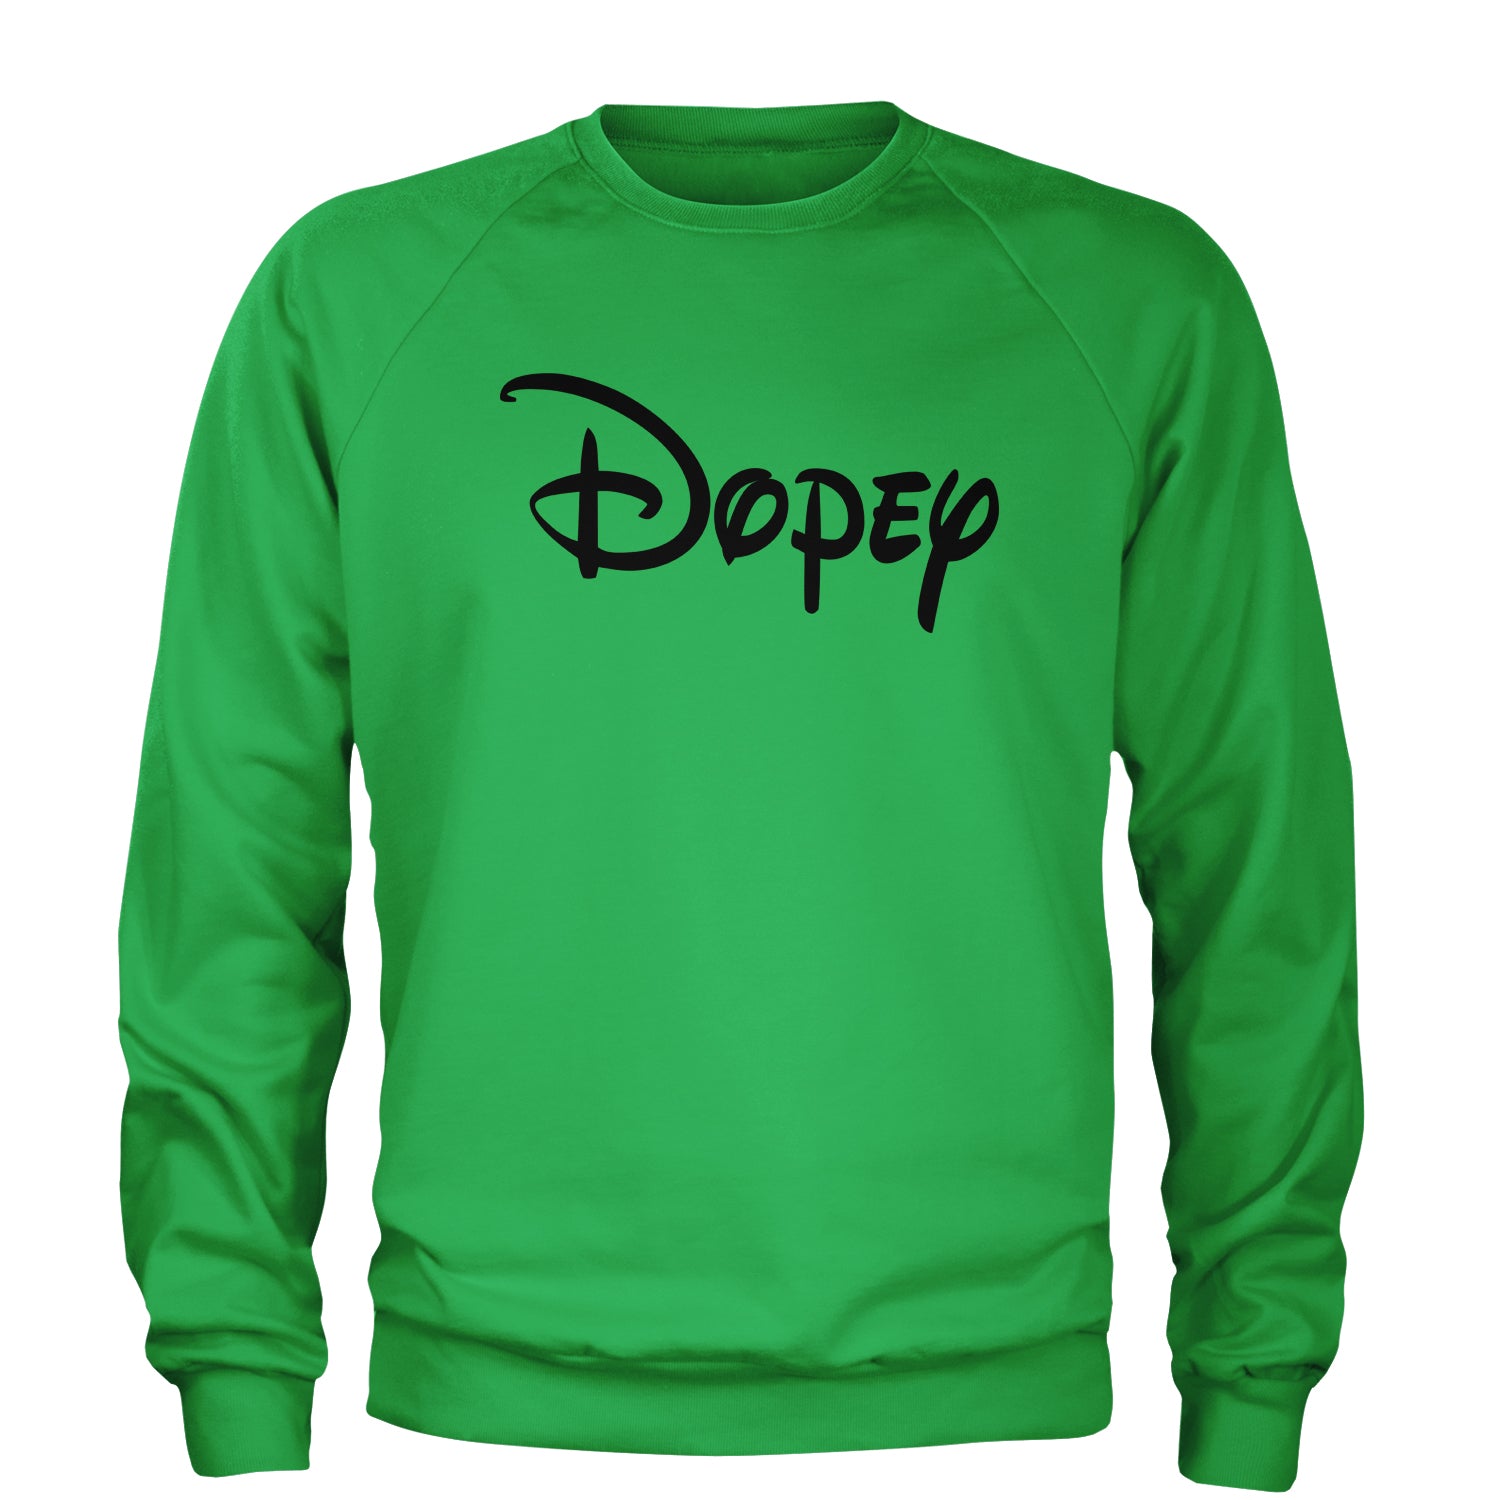 Dopey - 7 Dwarfs Costume Adult Crewneck Sweatshirt and, costume, dwarfs, group, halloween, matching, seven, snow, the, white by Expression Tees